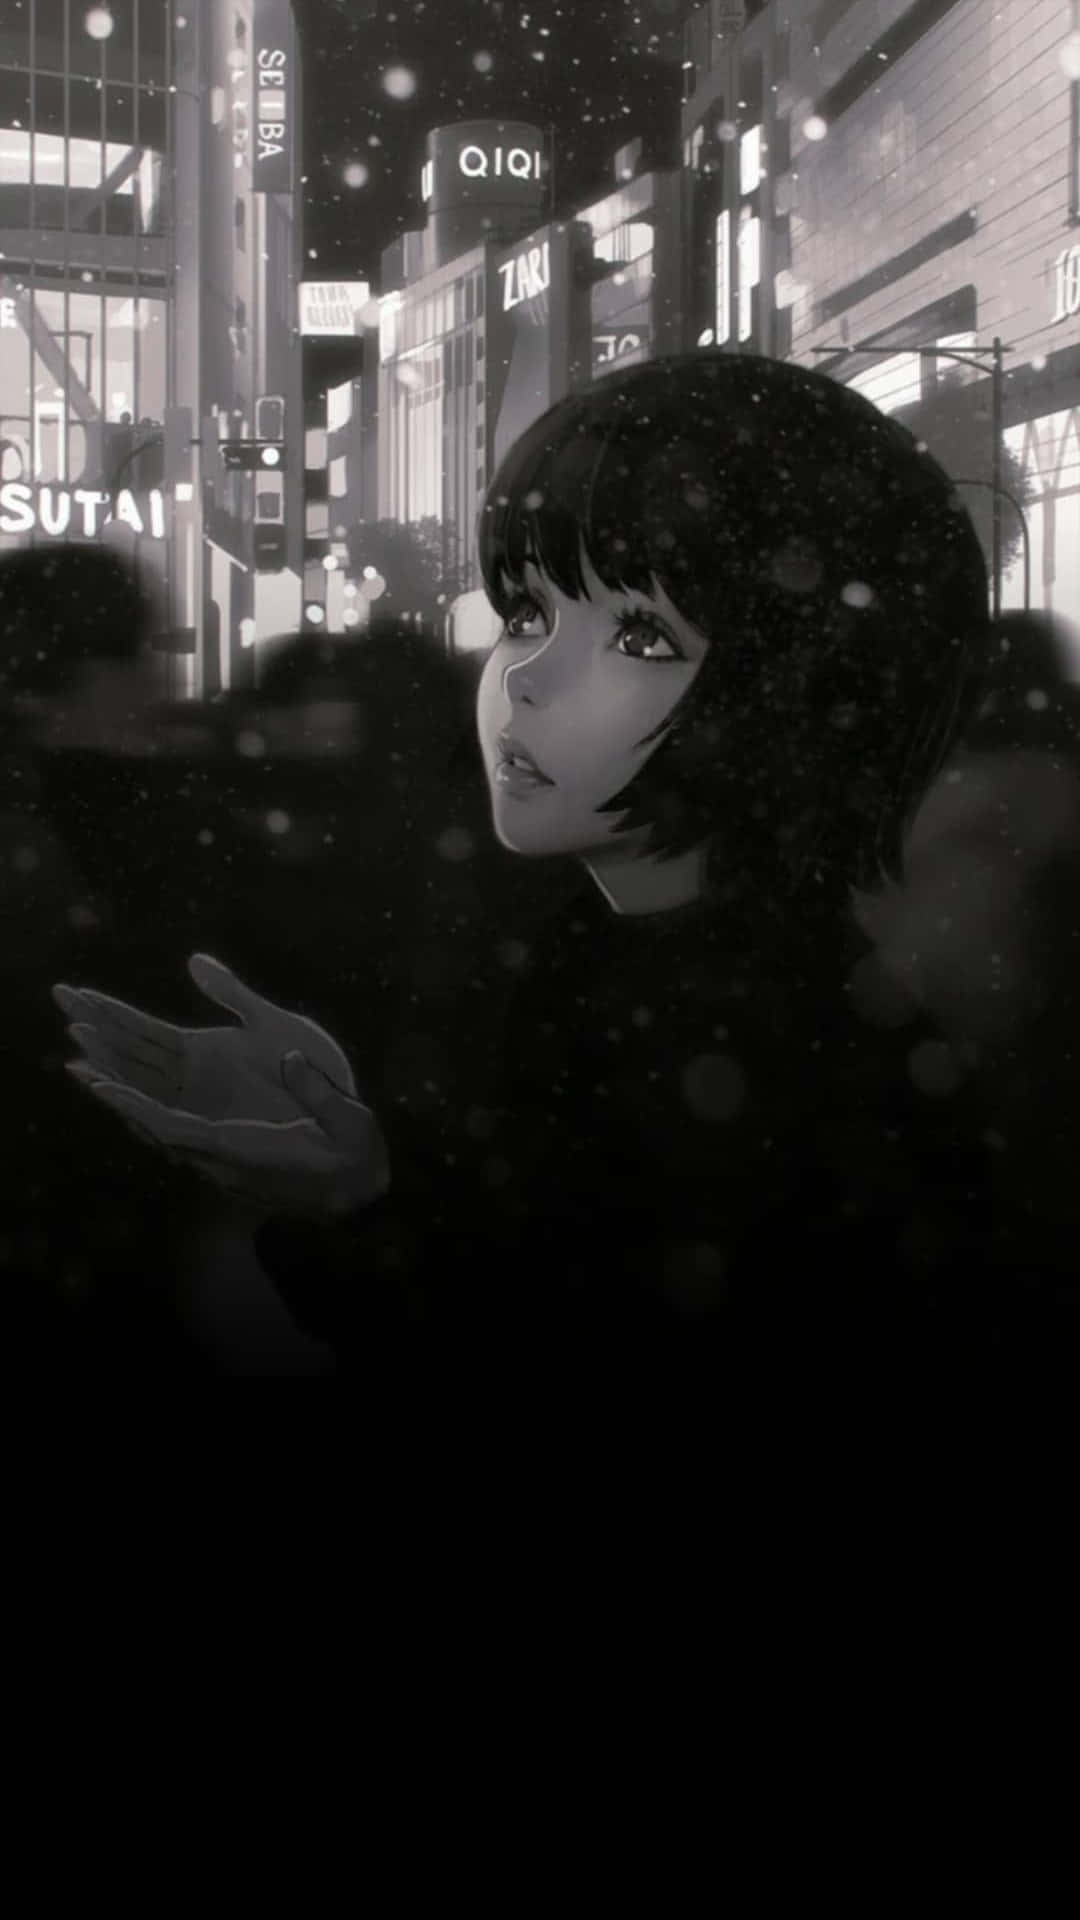 An eerily detailed female anime character in an all-black and white illustration Wallpaper